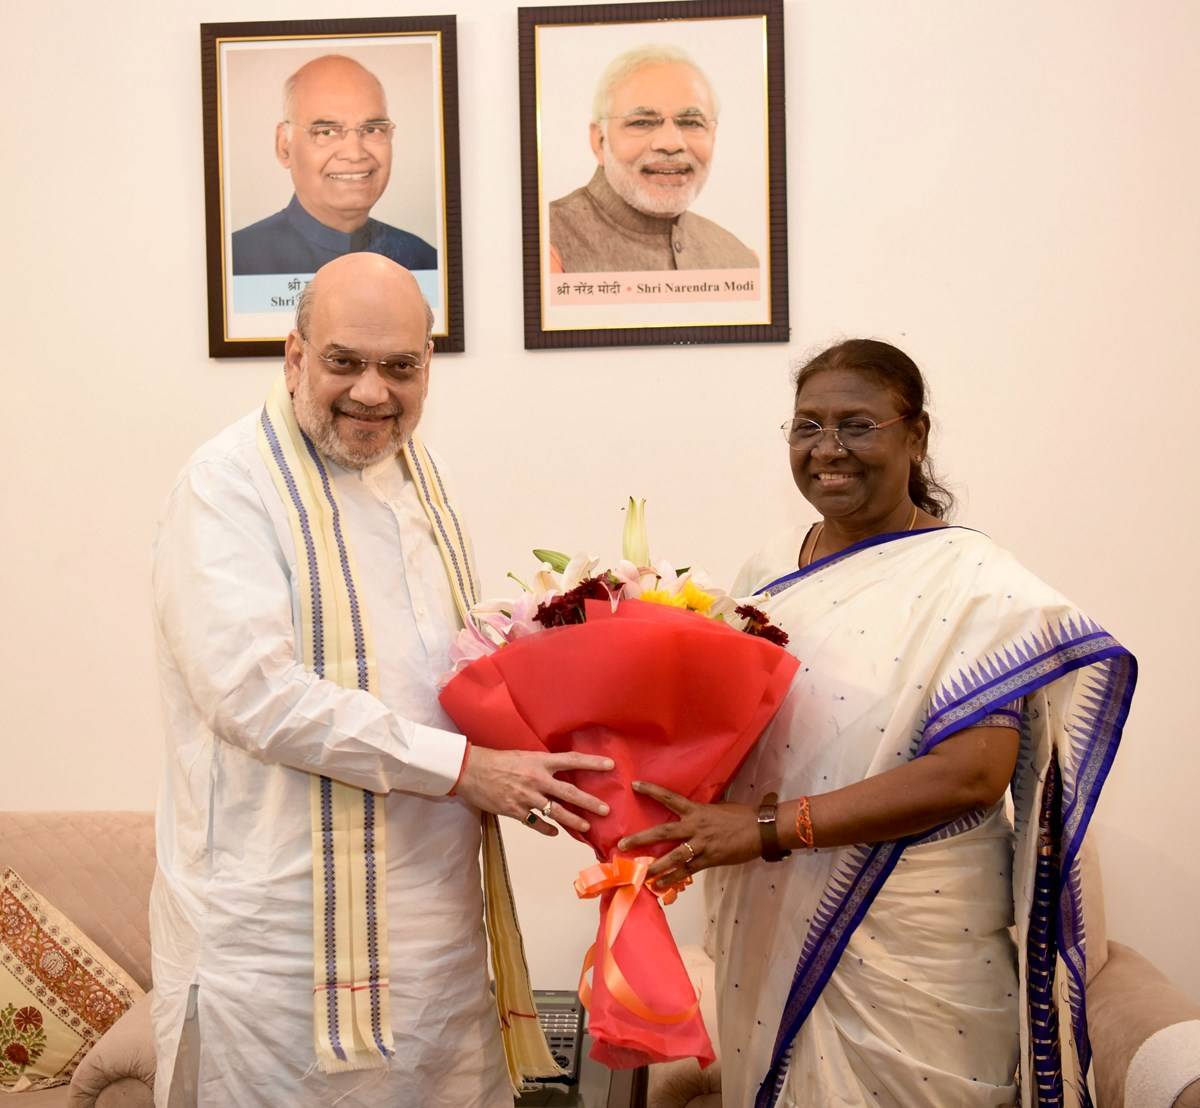 Union Home Minister, Minister of Cooperation, Amit Shah also met Droupadi Murmu, the newly elected President of India and congratulated her on this big victory.